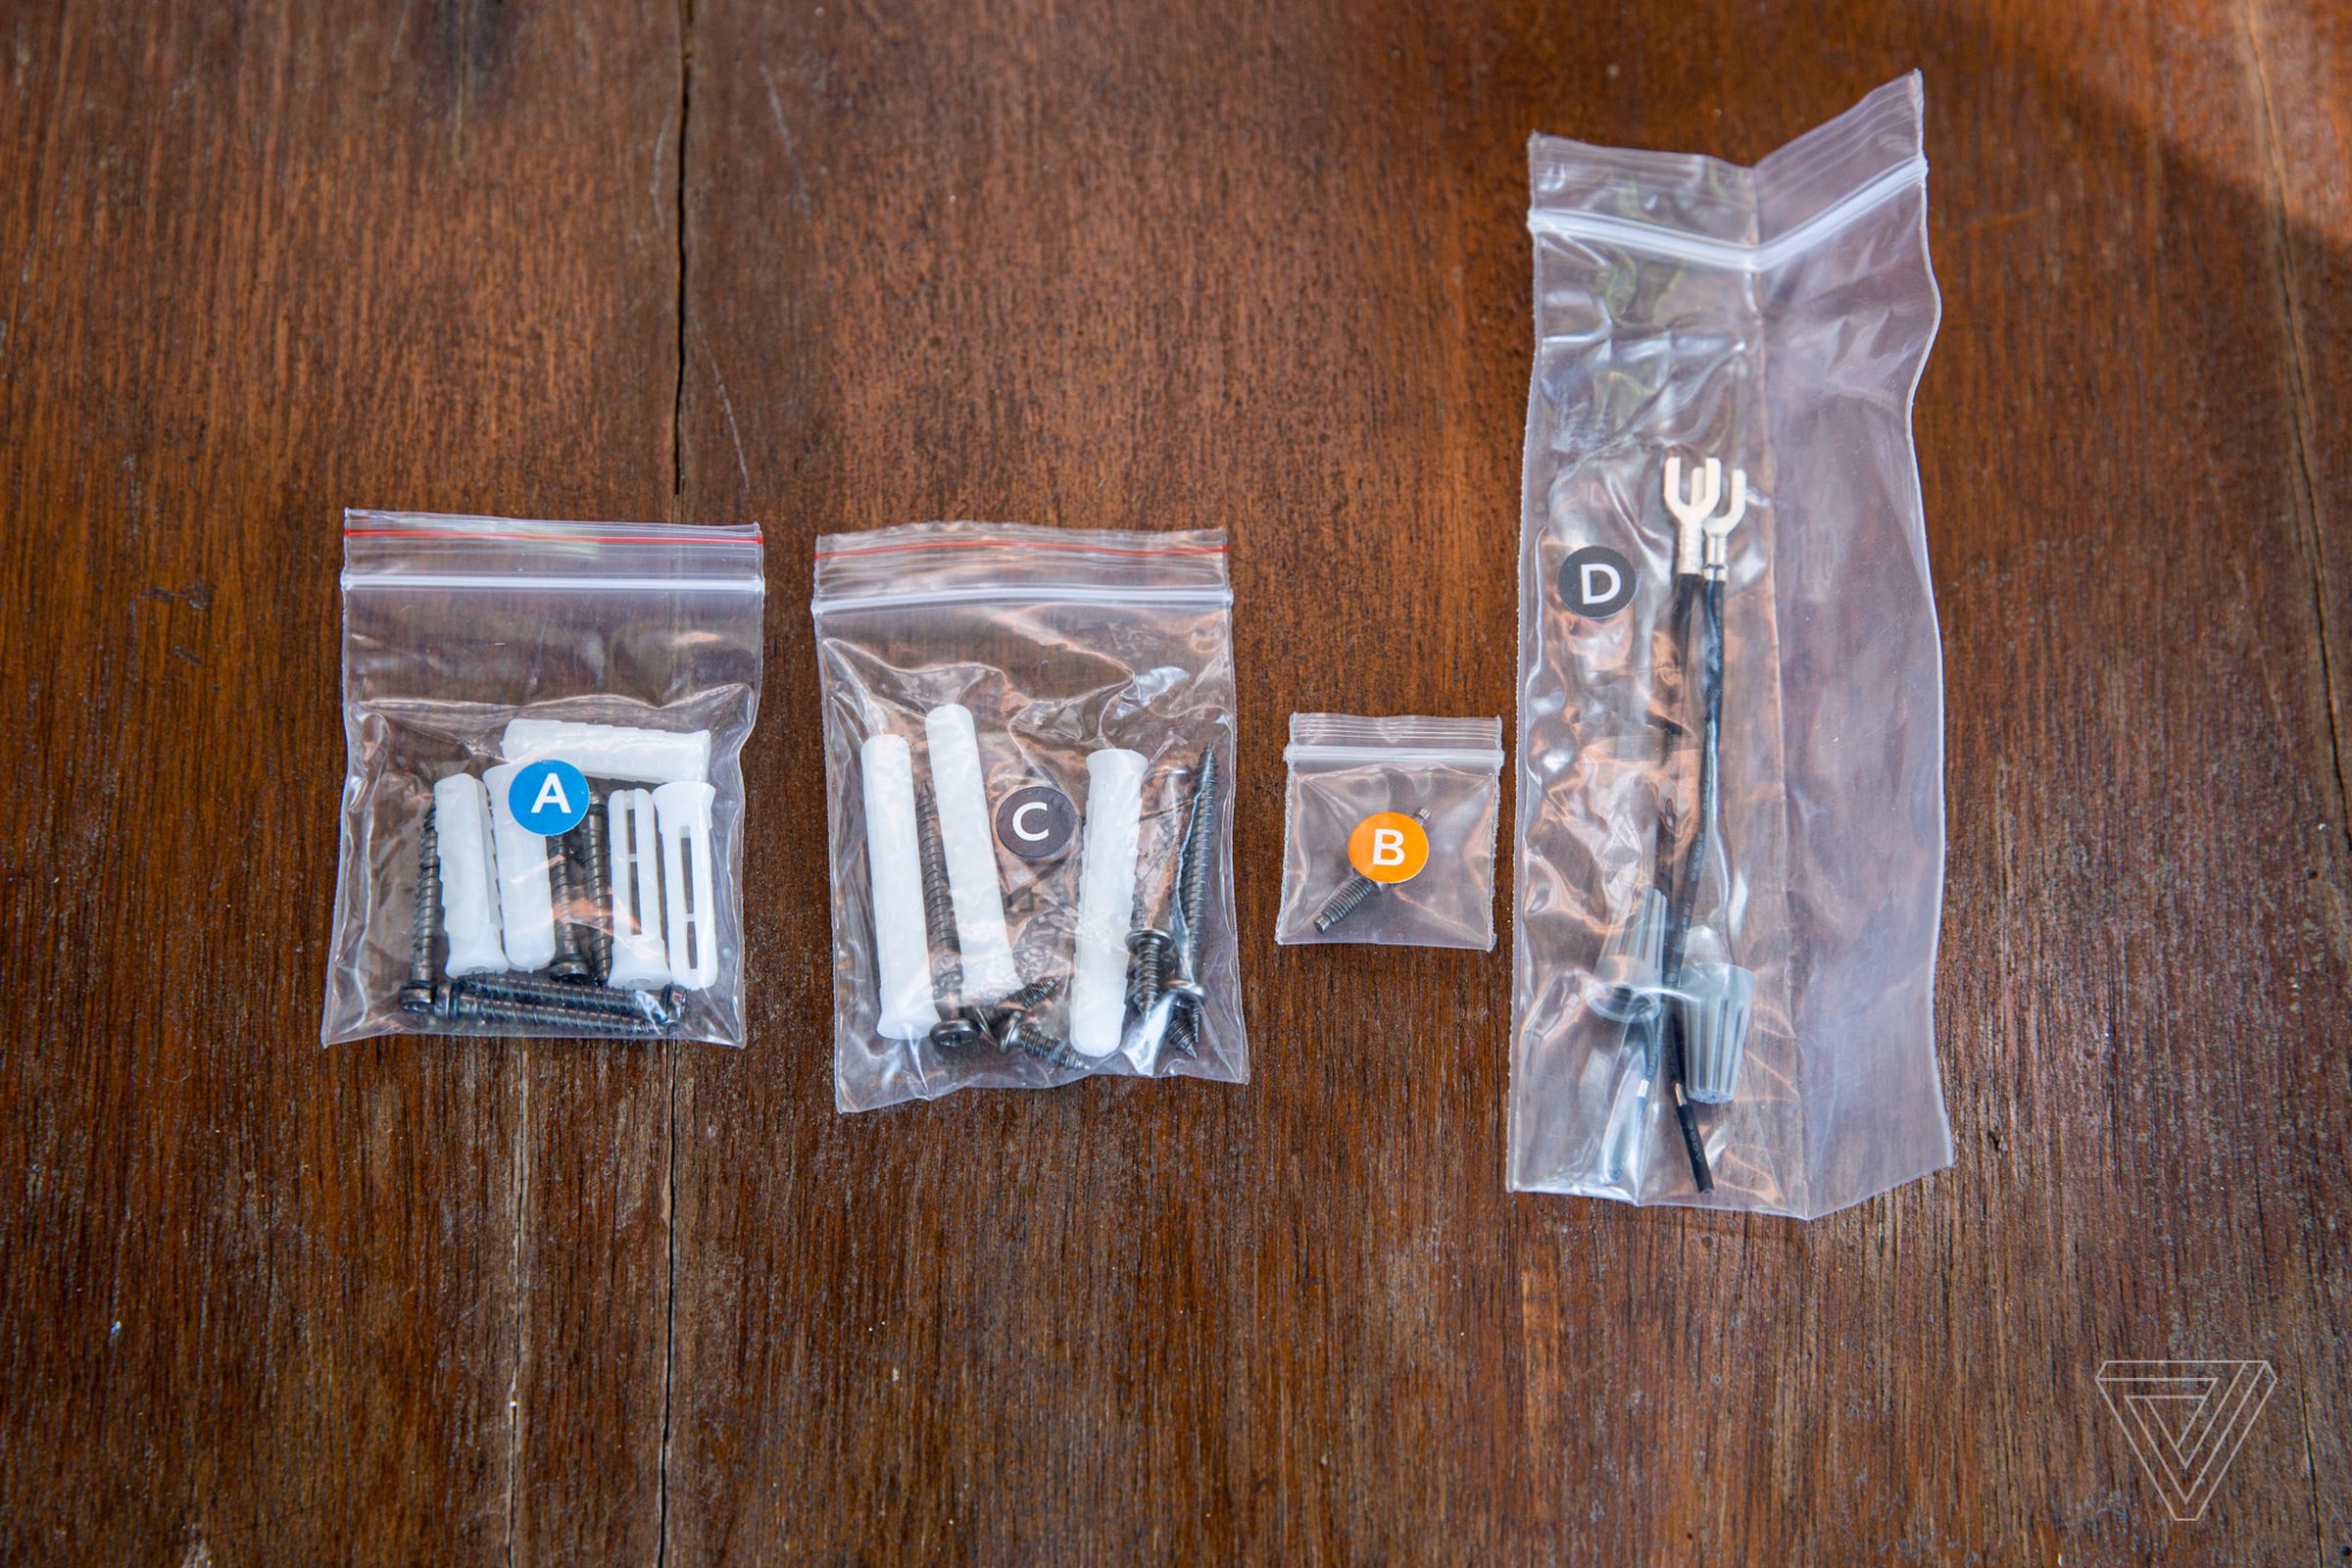 Ring provides everything you need to install the doorbell except a drill. The screws and wires are marked with letters to help you select the right ones.